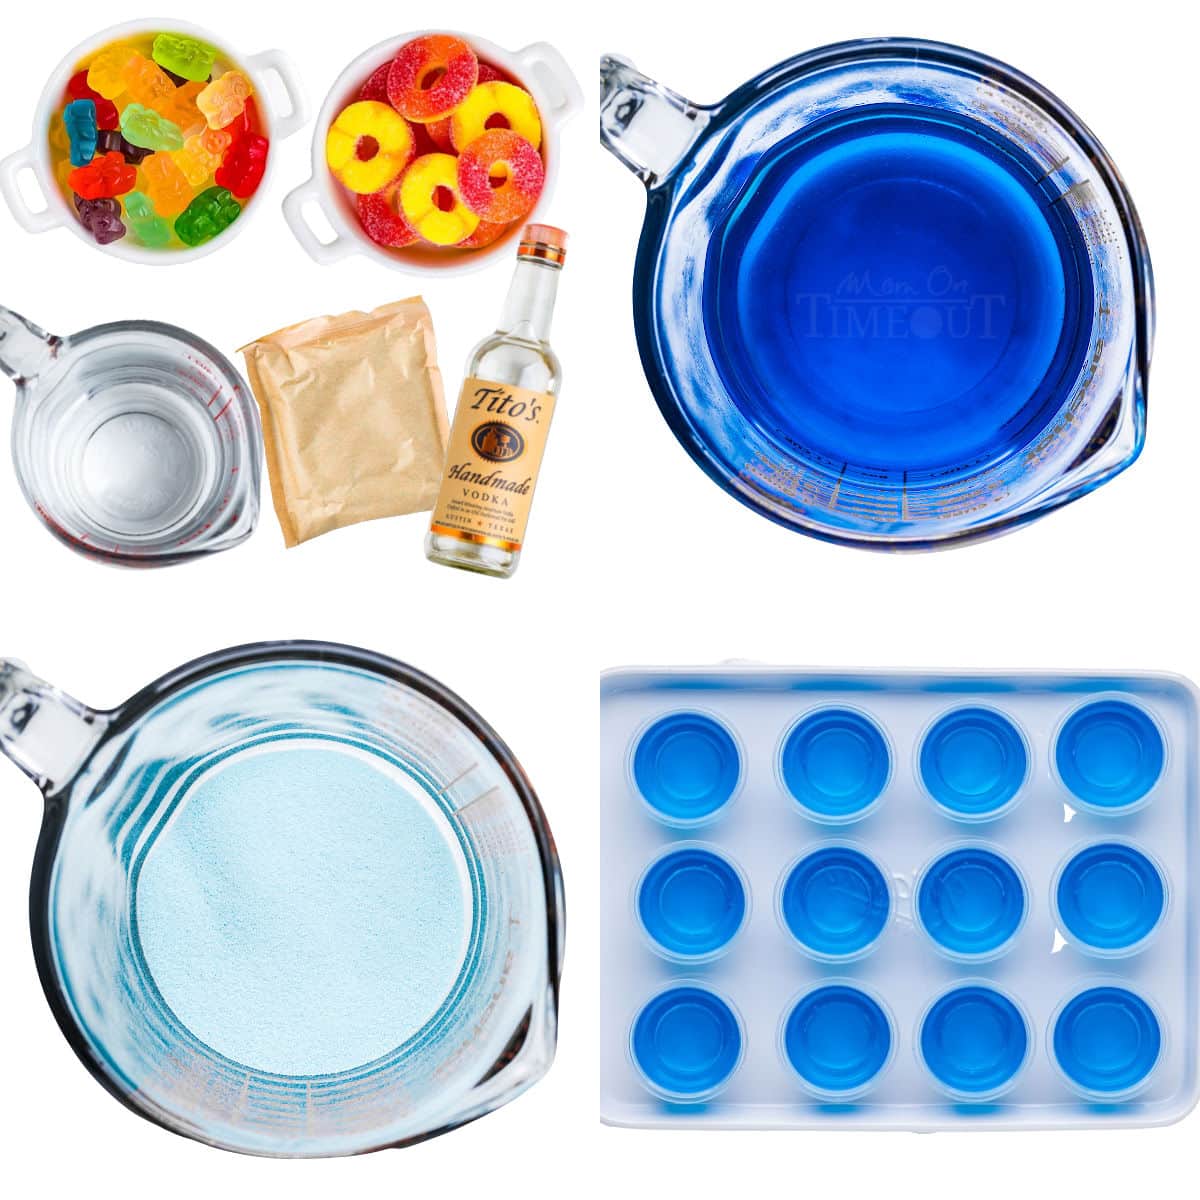 four image collage showing step by step how to make pool party jello shots.